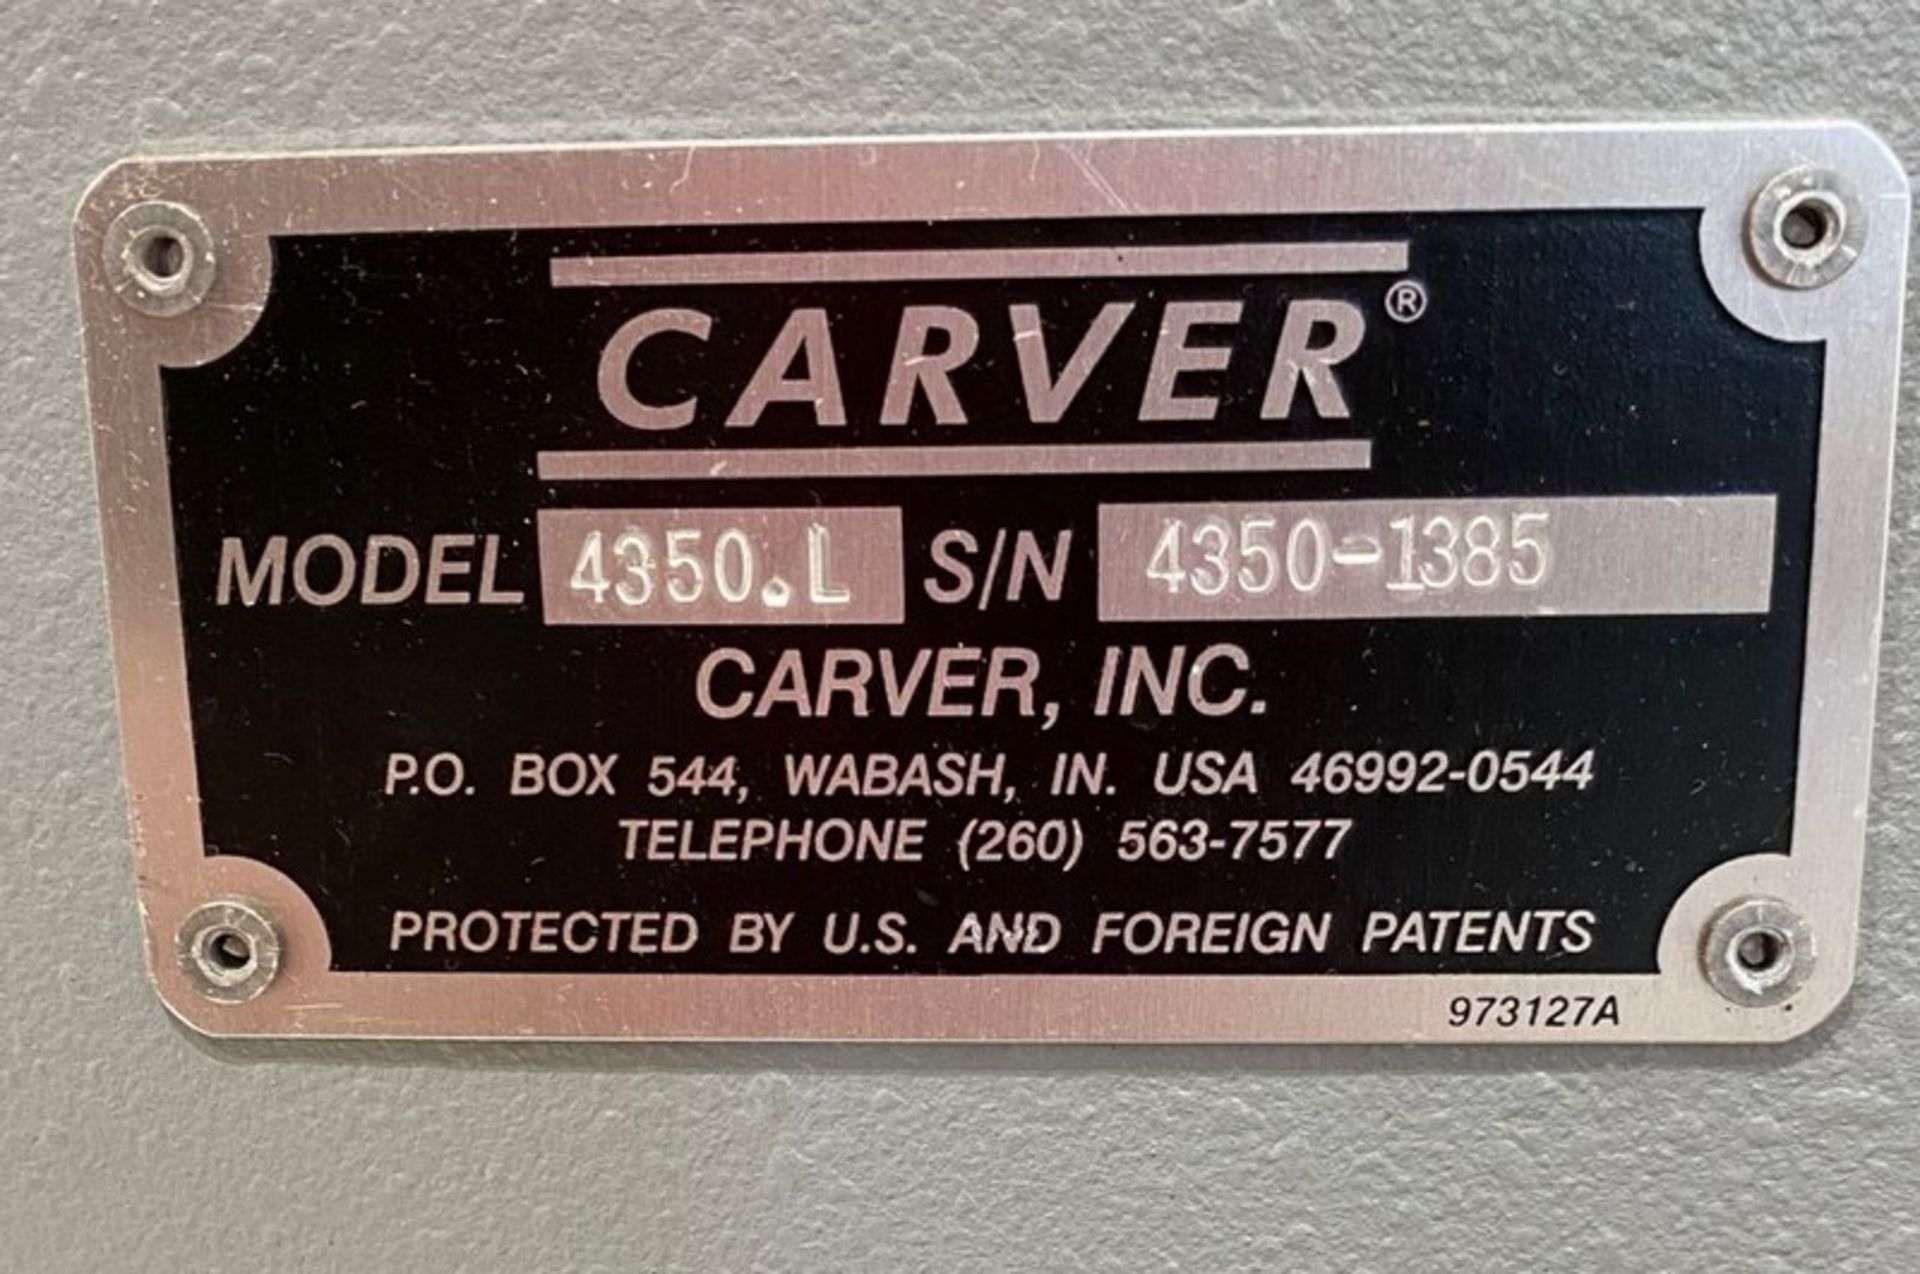 Carver Press, Model: 4350.L. This listing is only available to USA Customers only. DEA Paperwork - Bild 3 aus 3